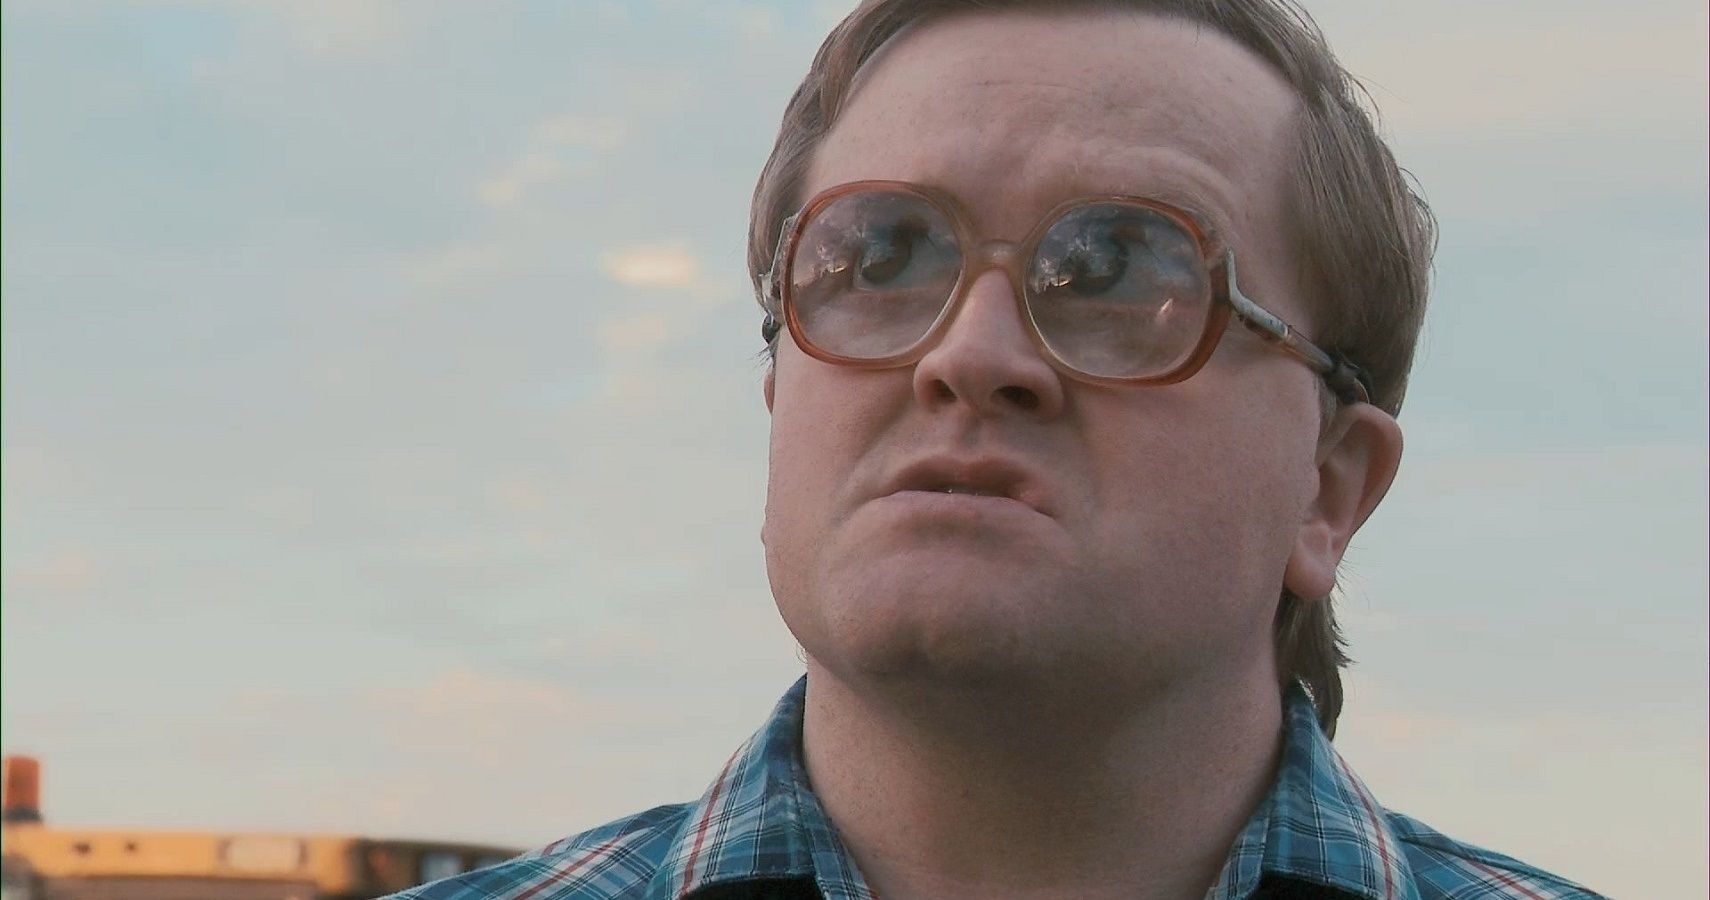 Trailer Park Boys: 10 Things You Never Knew About Bubbles